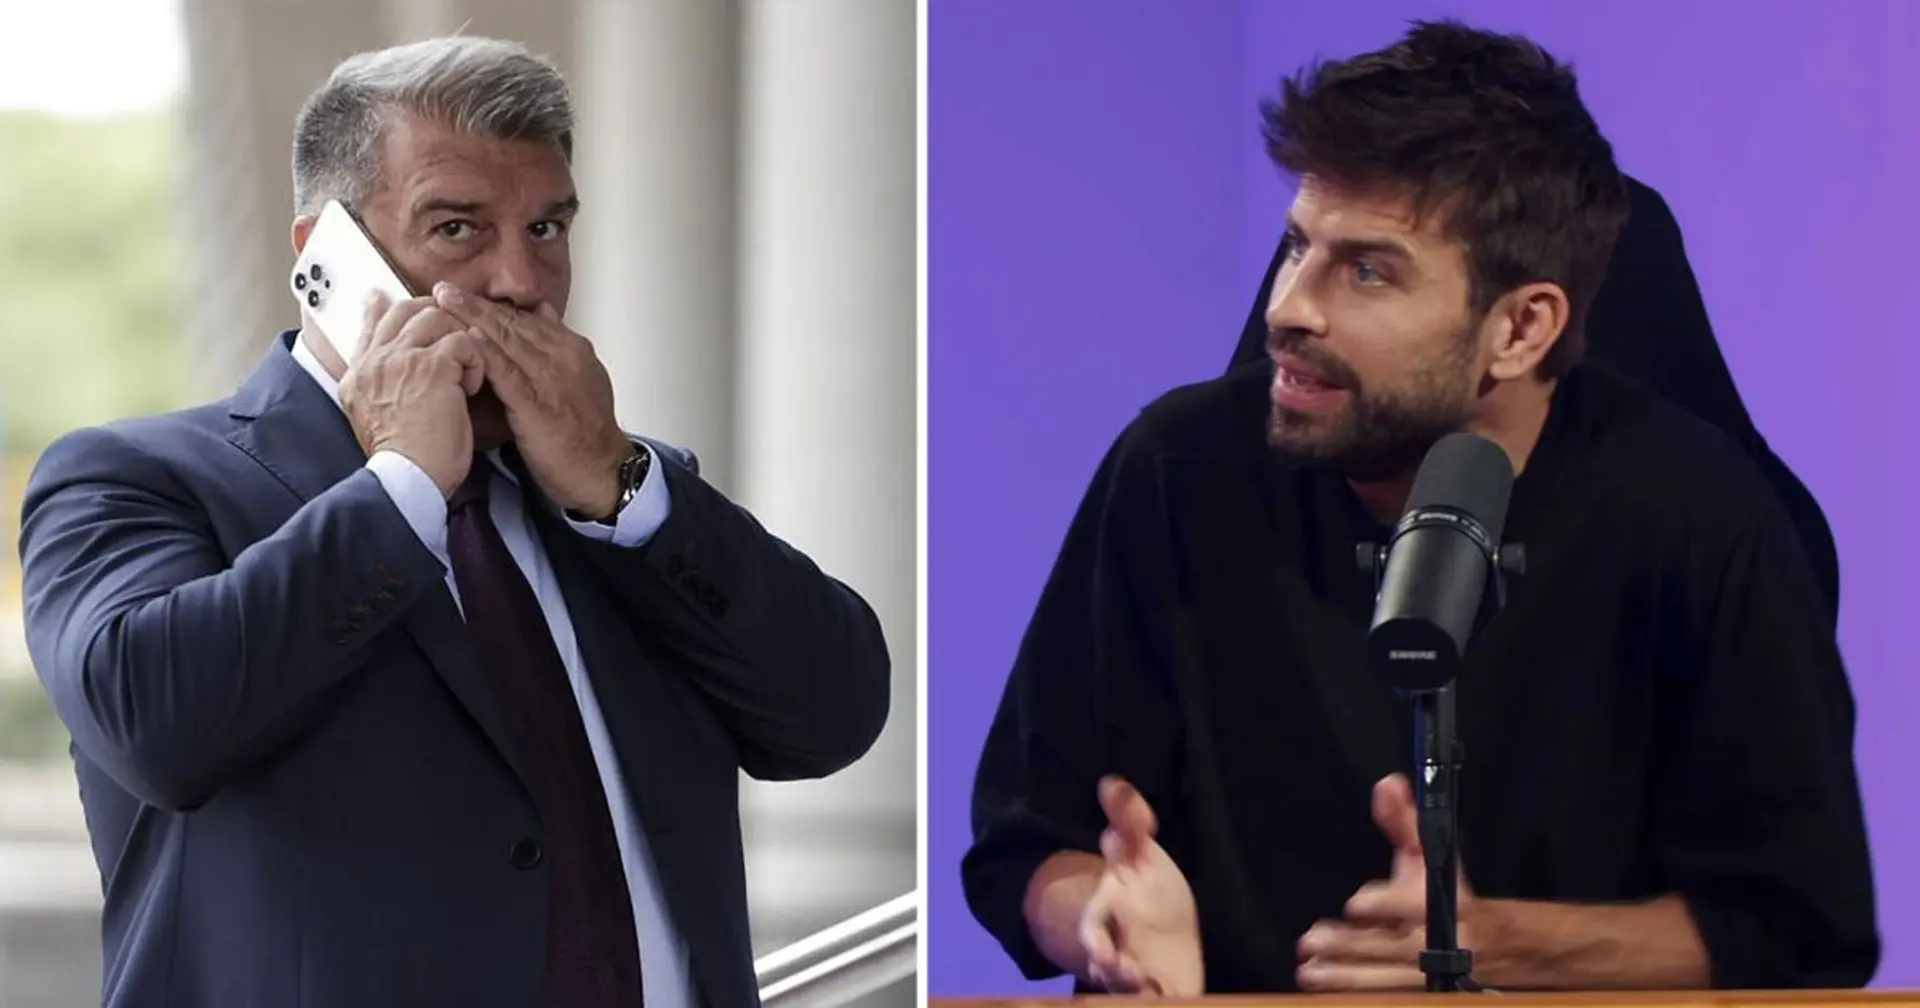 Pique makes one promise to Barca fans - it's not about presidency